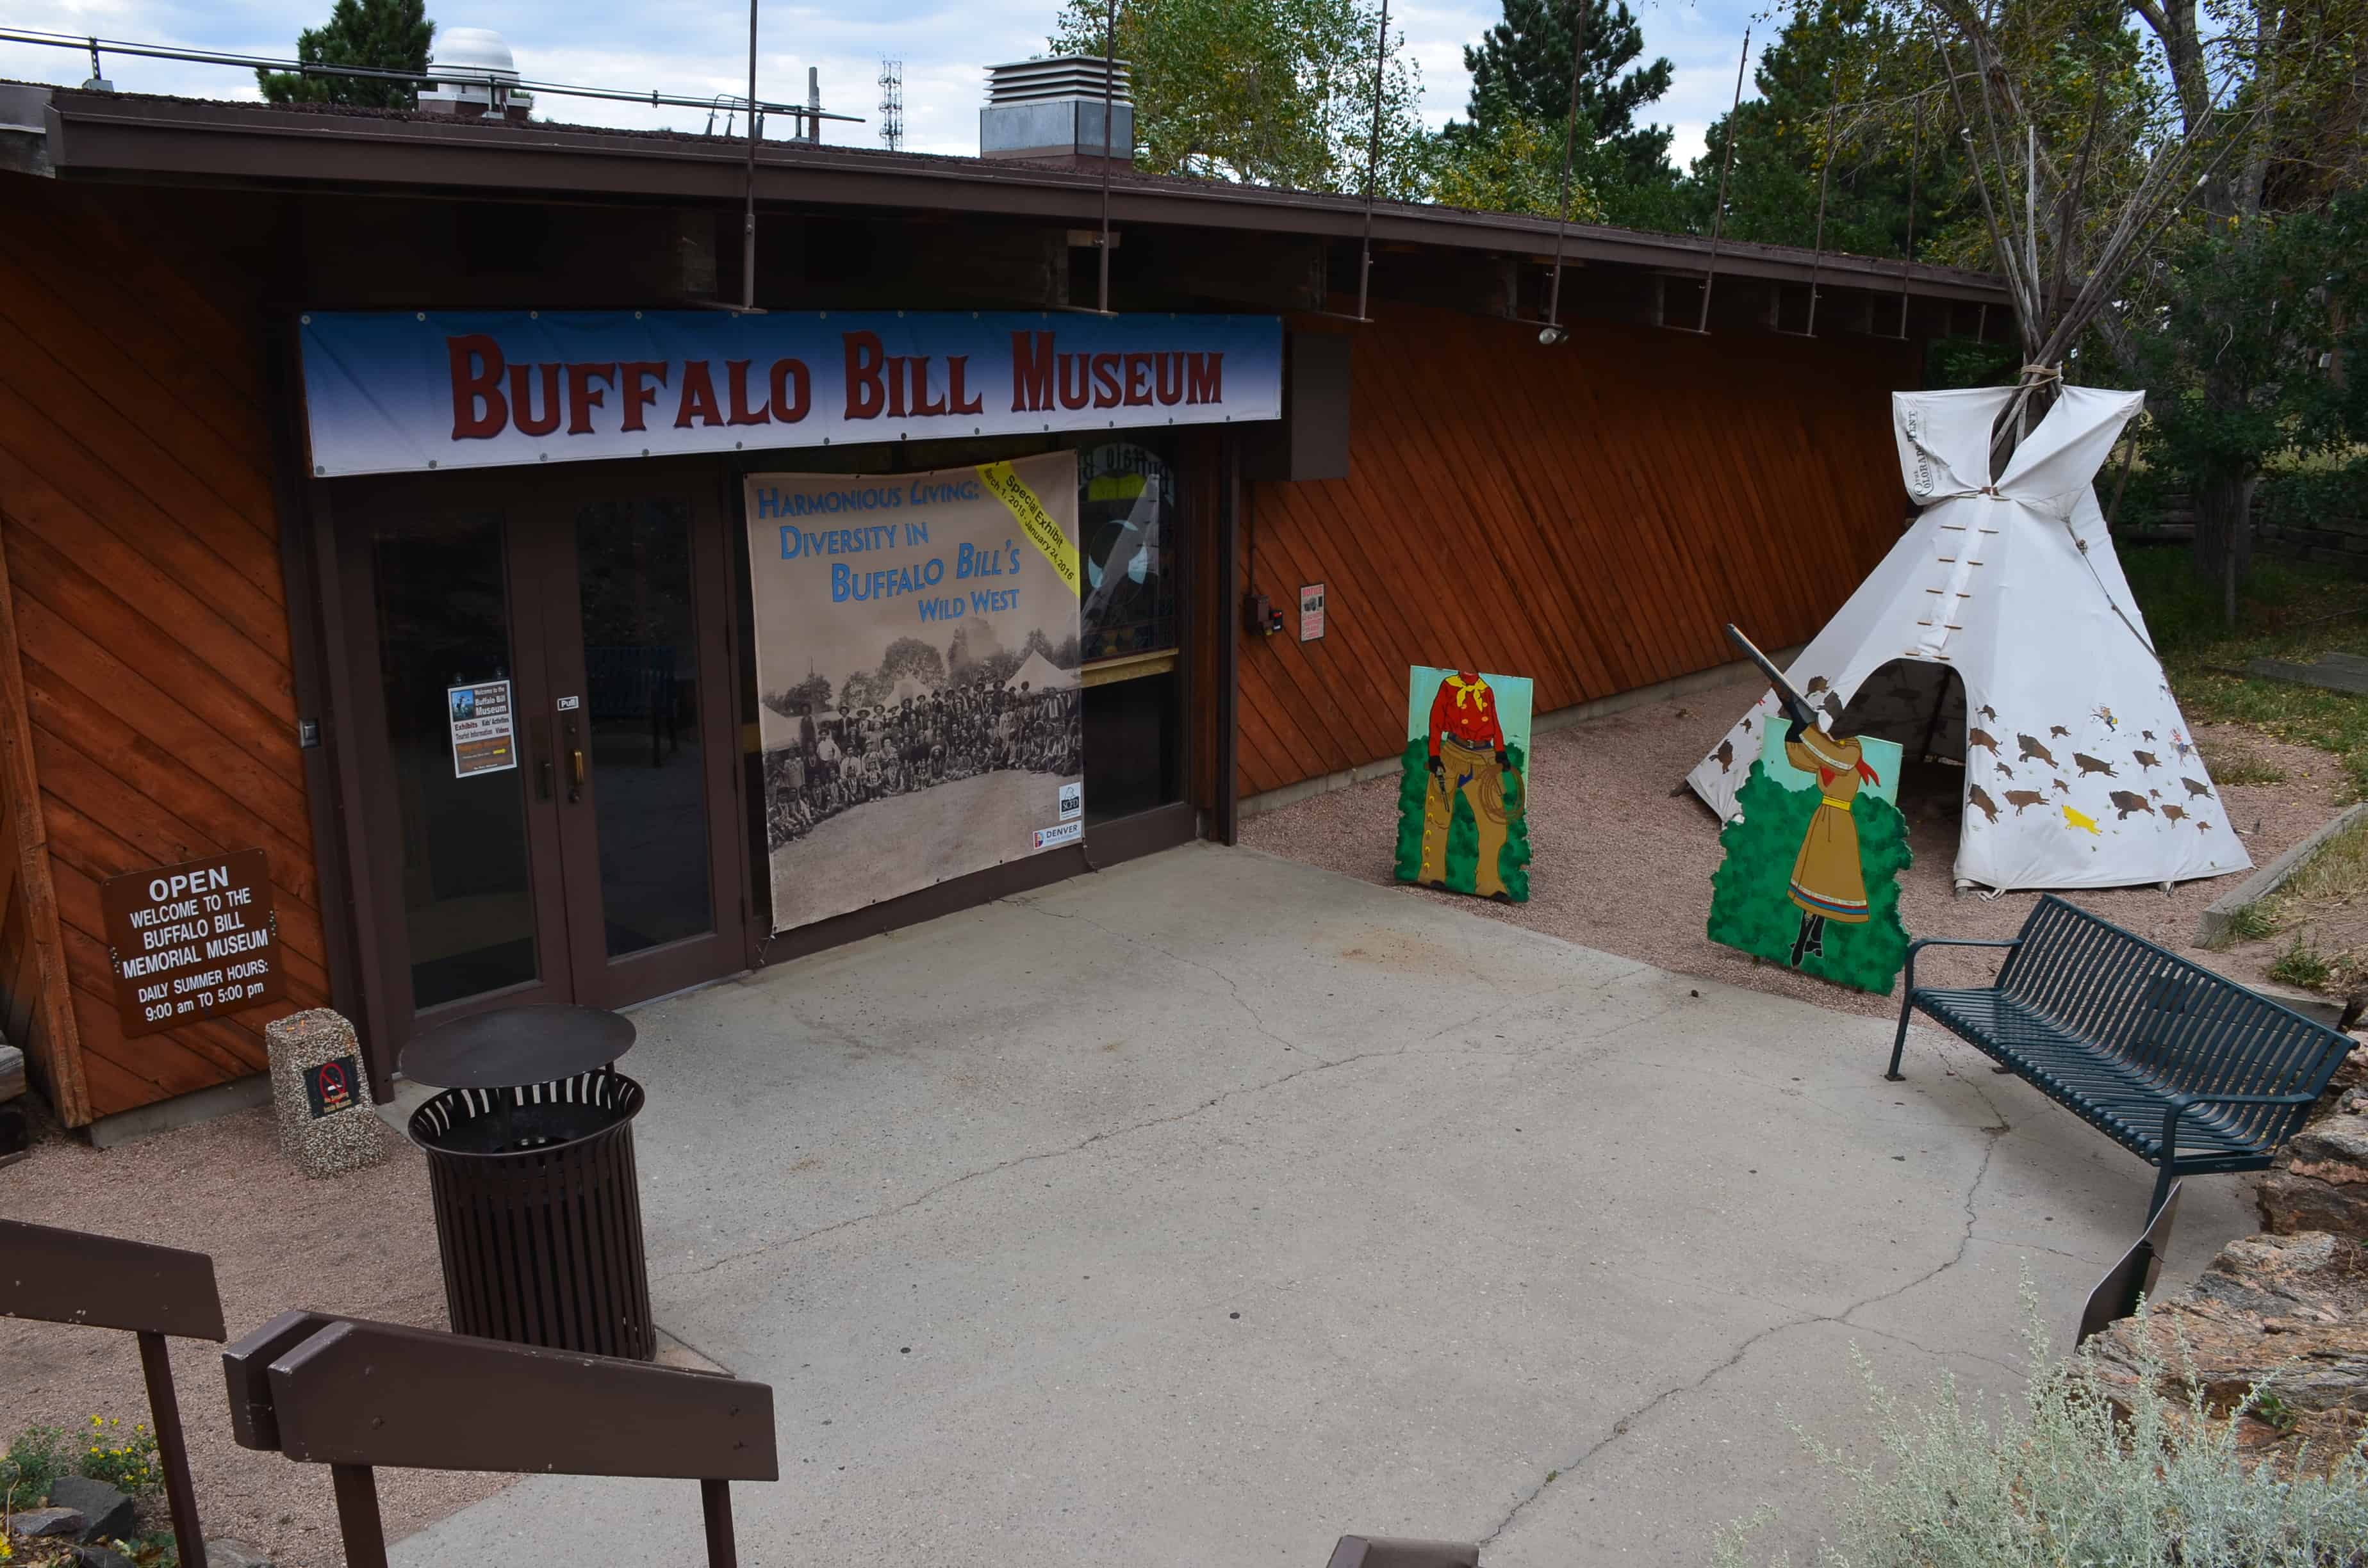 Buffalo Bill Museum on Lookout Mountain along the Lariat Loop National Scenic Byway in Colorado